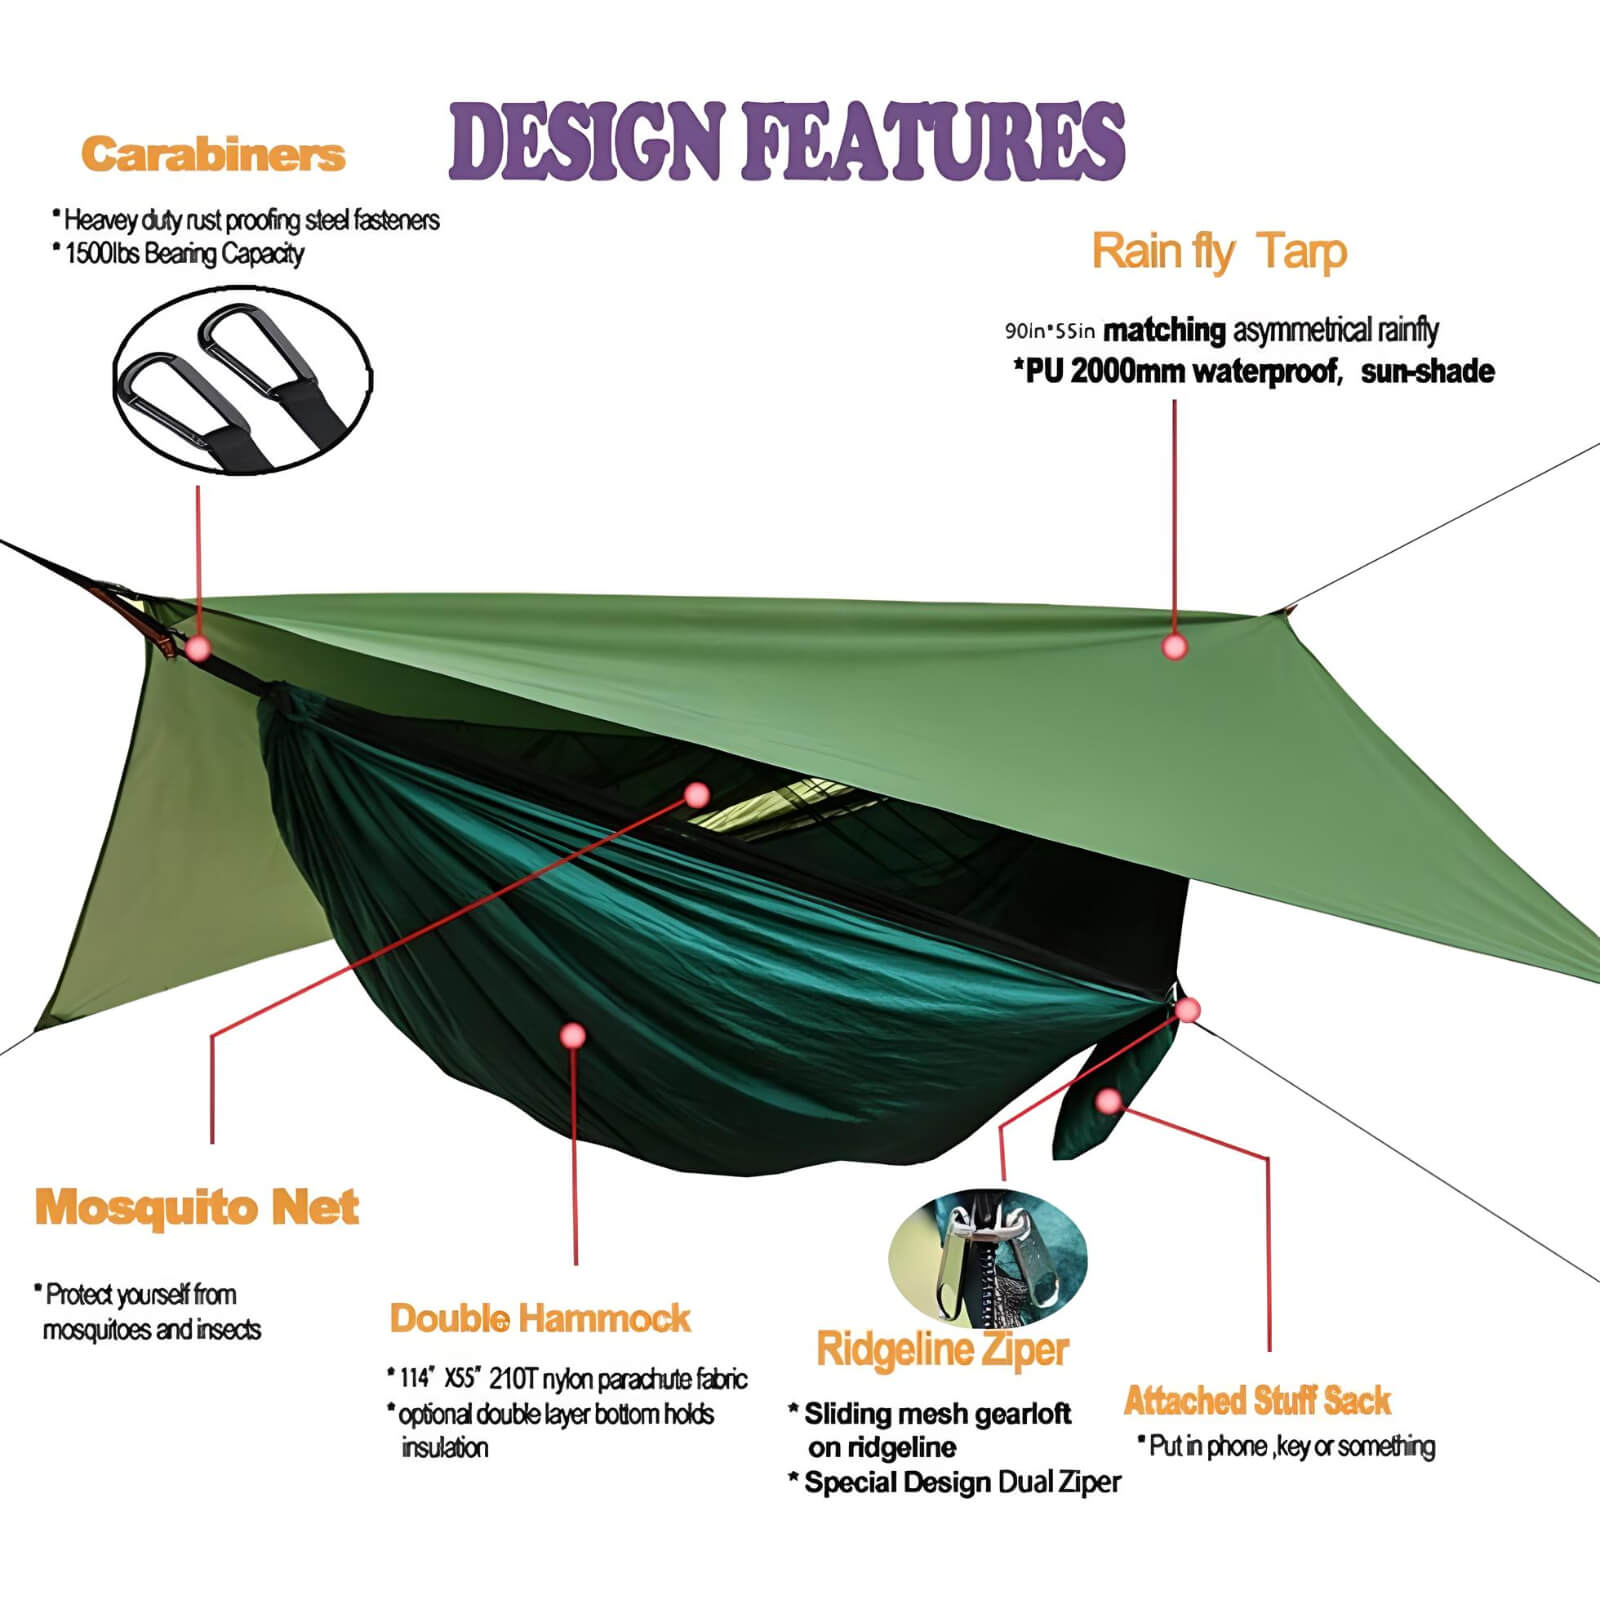    hammock-with-mosquito-net-tent-design-details